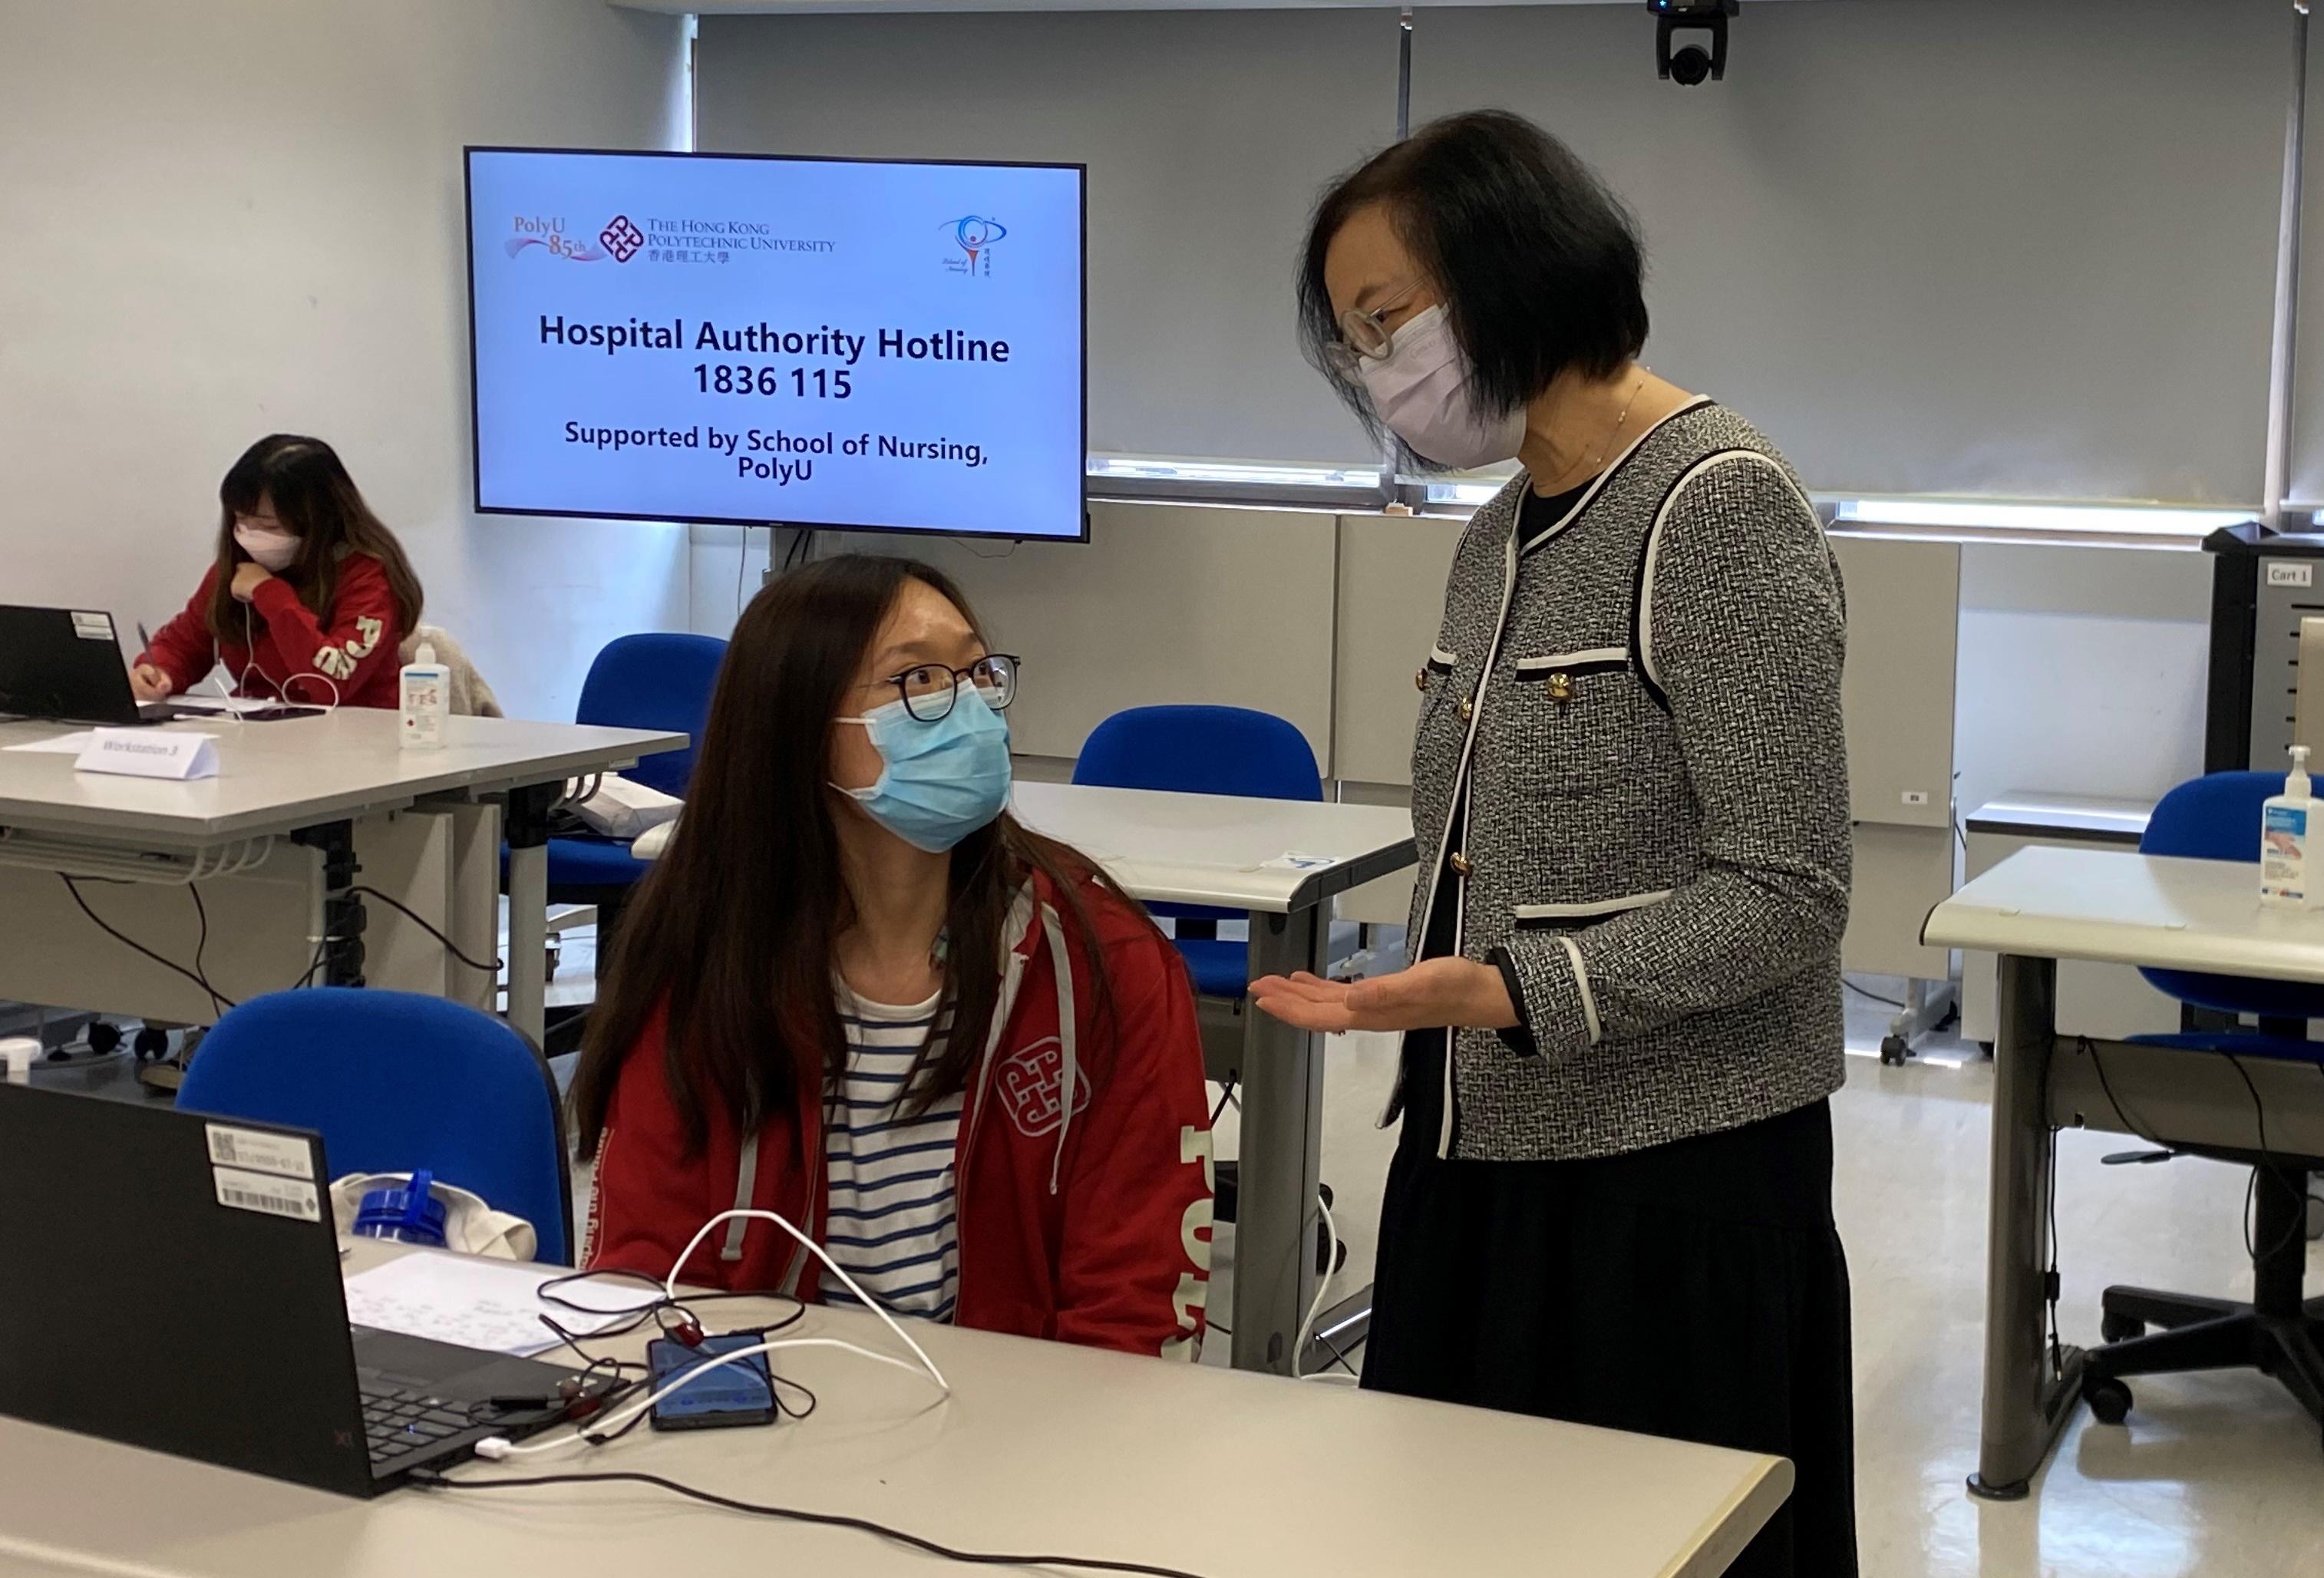 The Secretary for Food and Health, Professor Sophia Chan (right), visits the School of Nursing of the Hong Kong Polytechnic University today (March 18) to learn about the hotline centre set up to support the Hospital Authority in receiving and handling enquiries from COVID-19 patients.